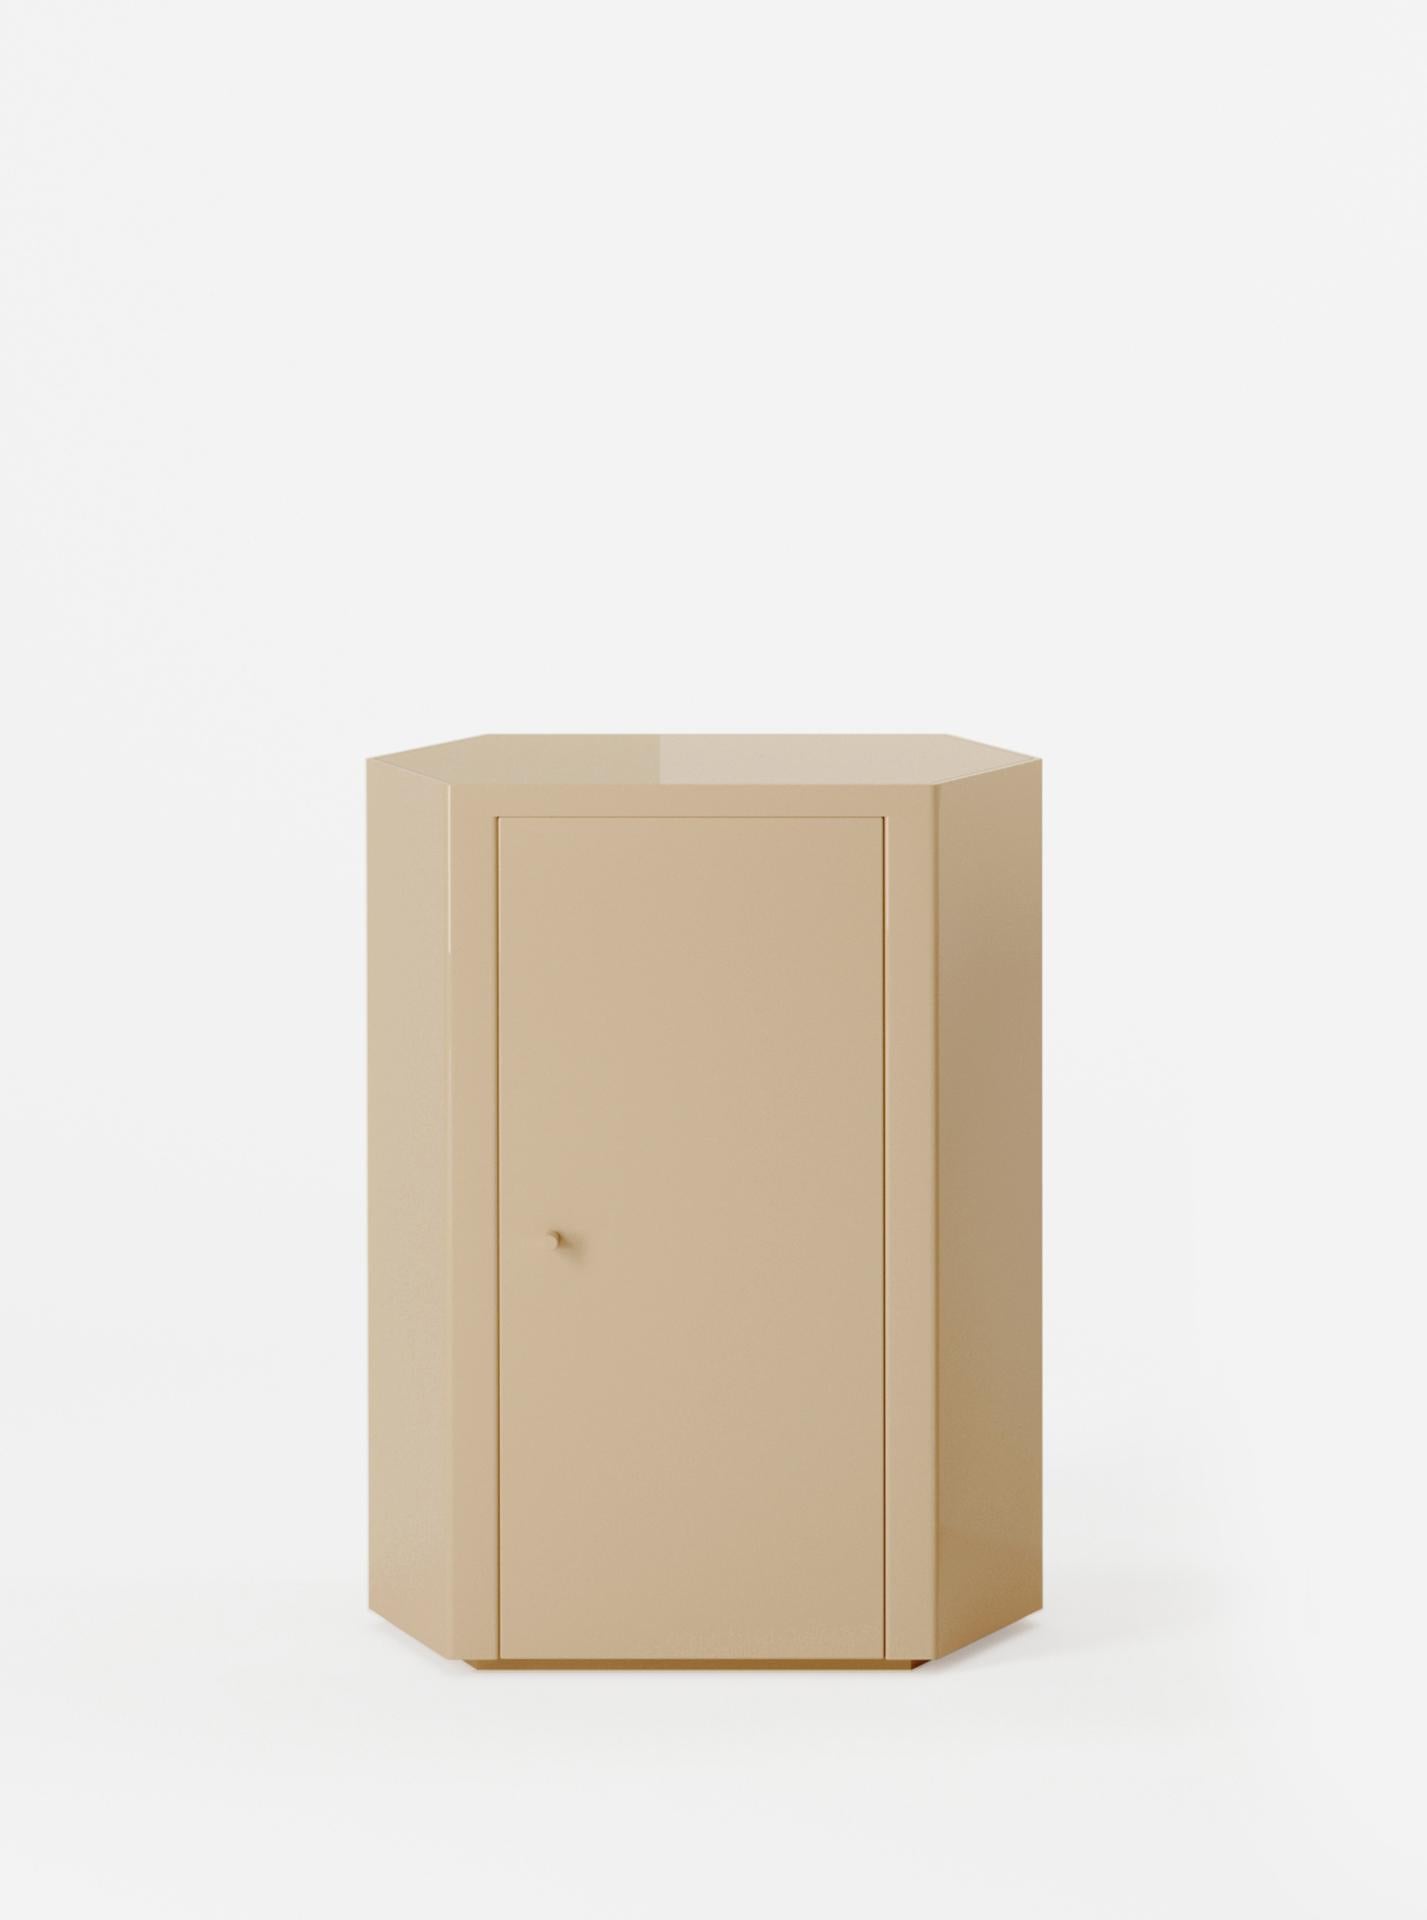 Minimalist Pair of Park Night Stands in Sand Beige Lacquer by Yaniv Chen for Lemon For Sale